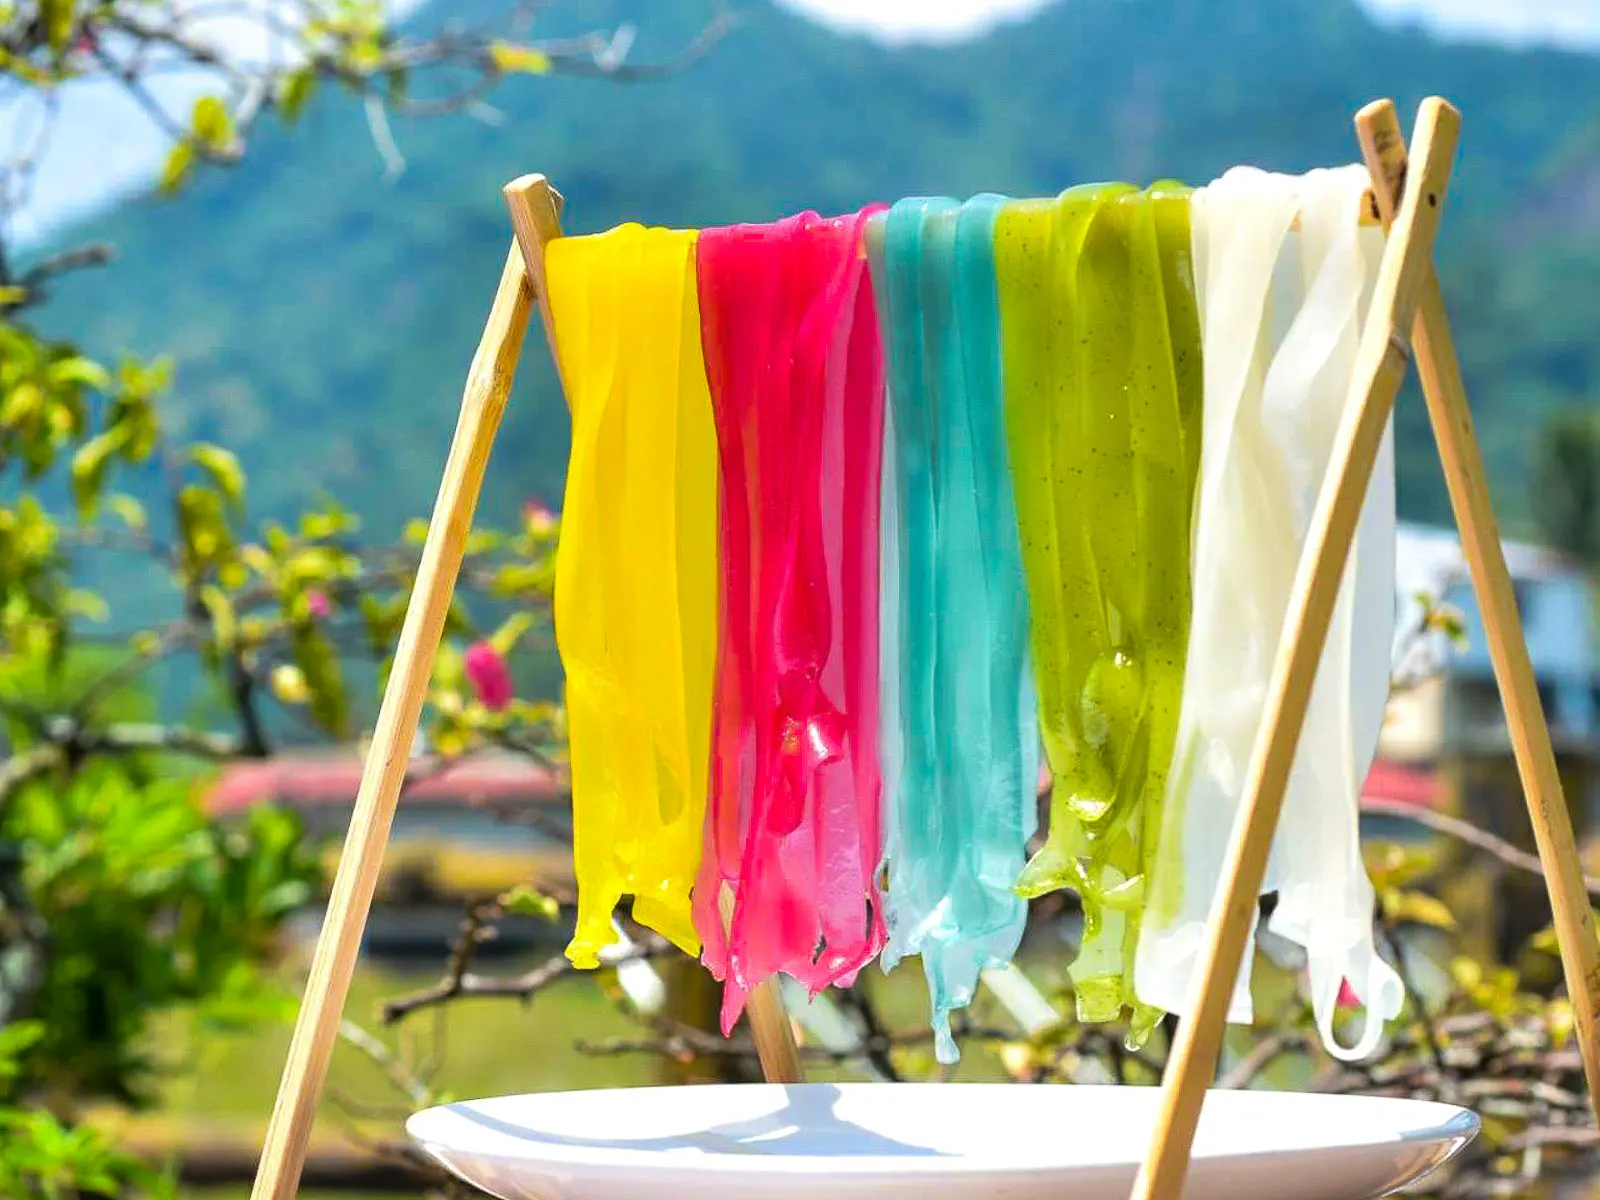 Five portions of noodles of various colors hangs above a plate.